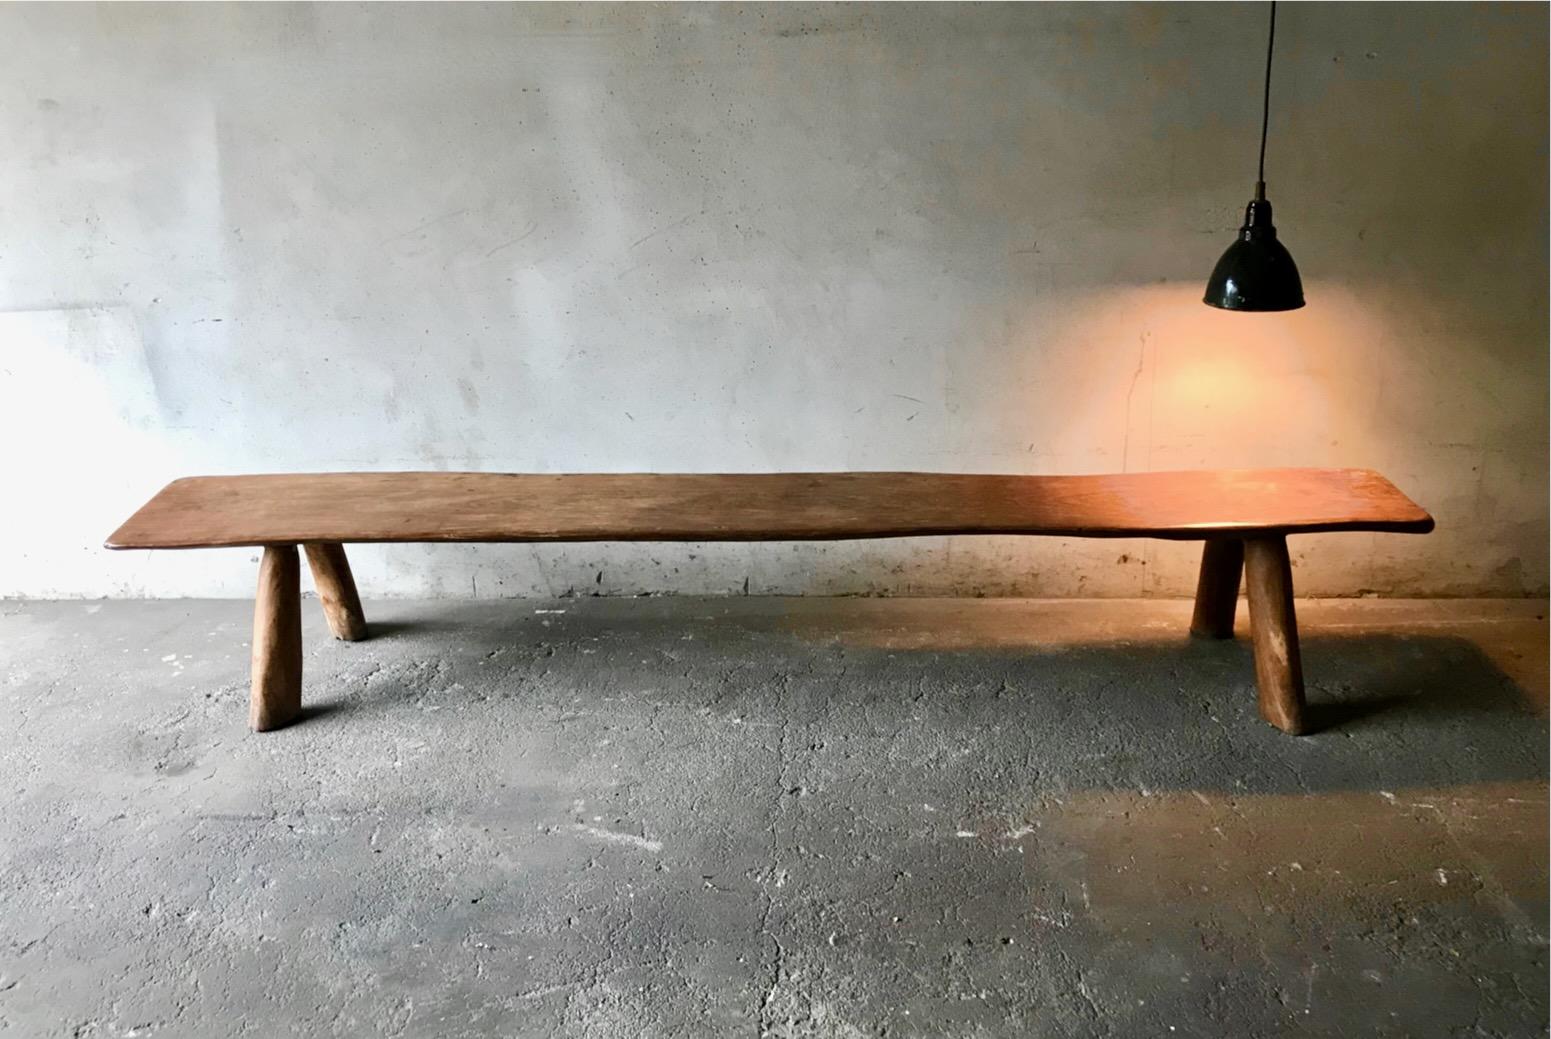 Beautiful solid brutalist Bench made of Elmwood attributed to Olavi Hanninen, for Miko Nupponen, Finland,1950’s. The bench is characterized by its raw concrete and stark, geometric forms combined with the contrast of the warm, natural qualities of